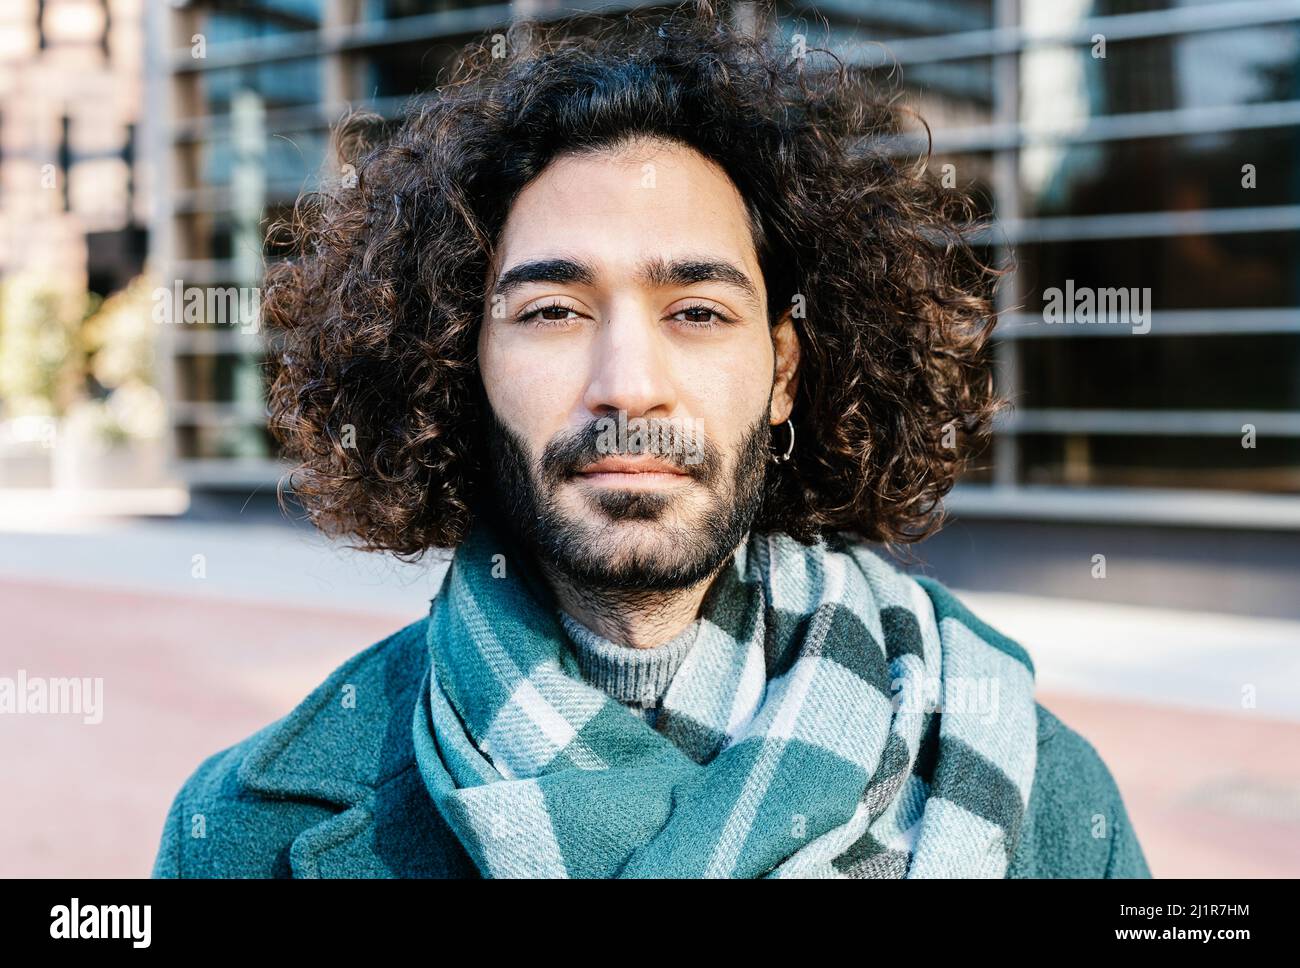 Urban portrait of the young curly man with beard posing on the street Stock Photo